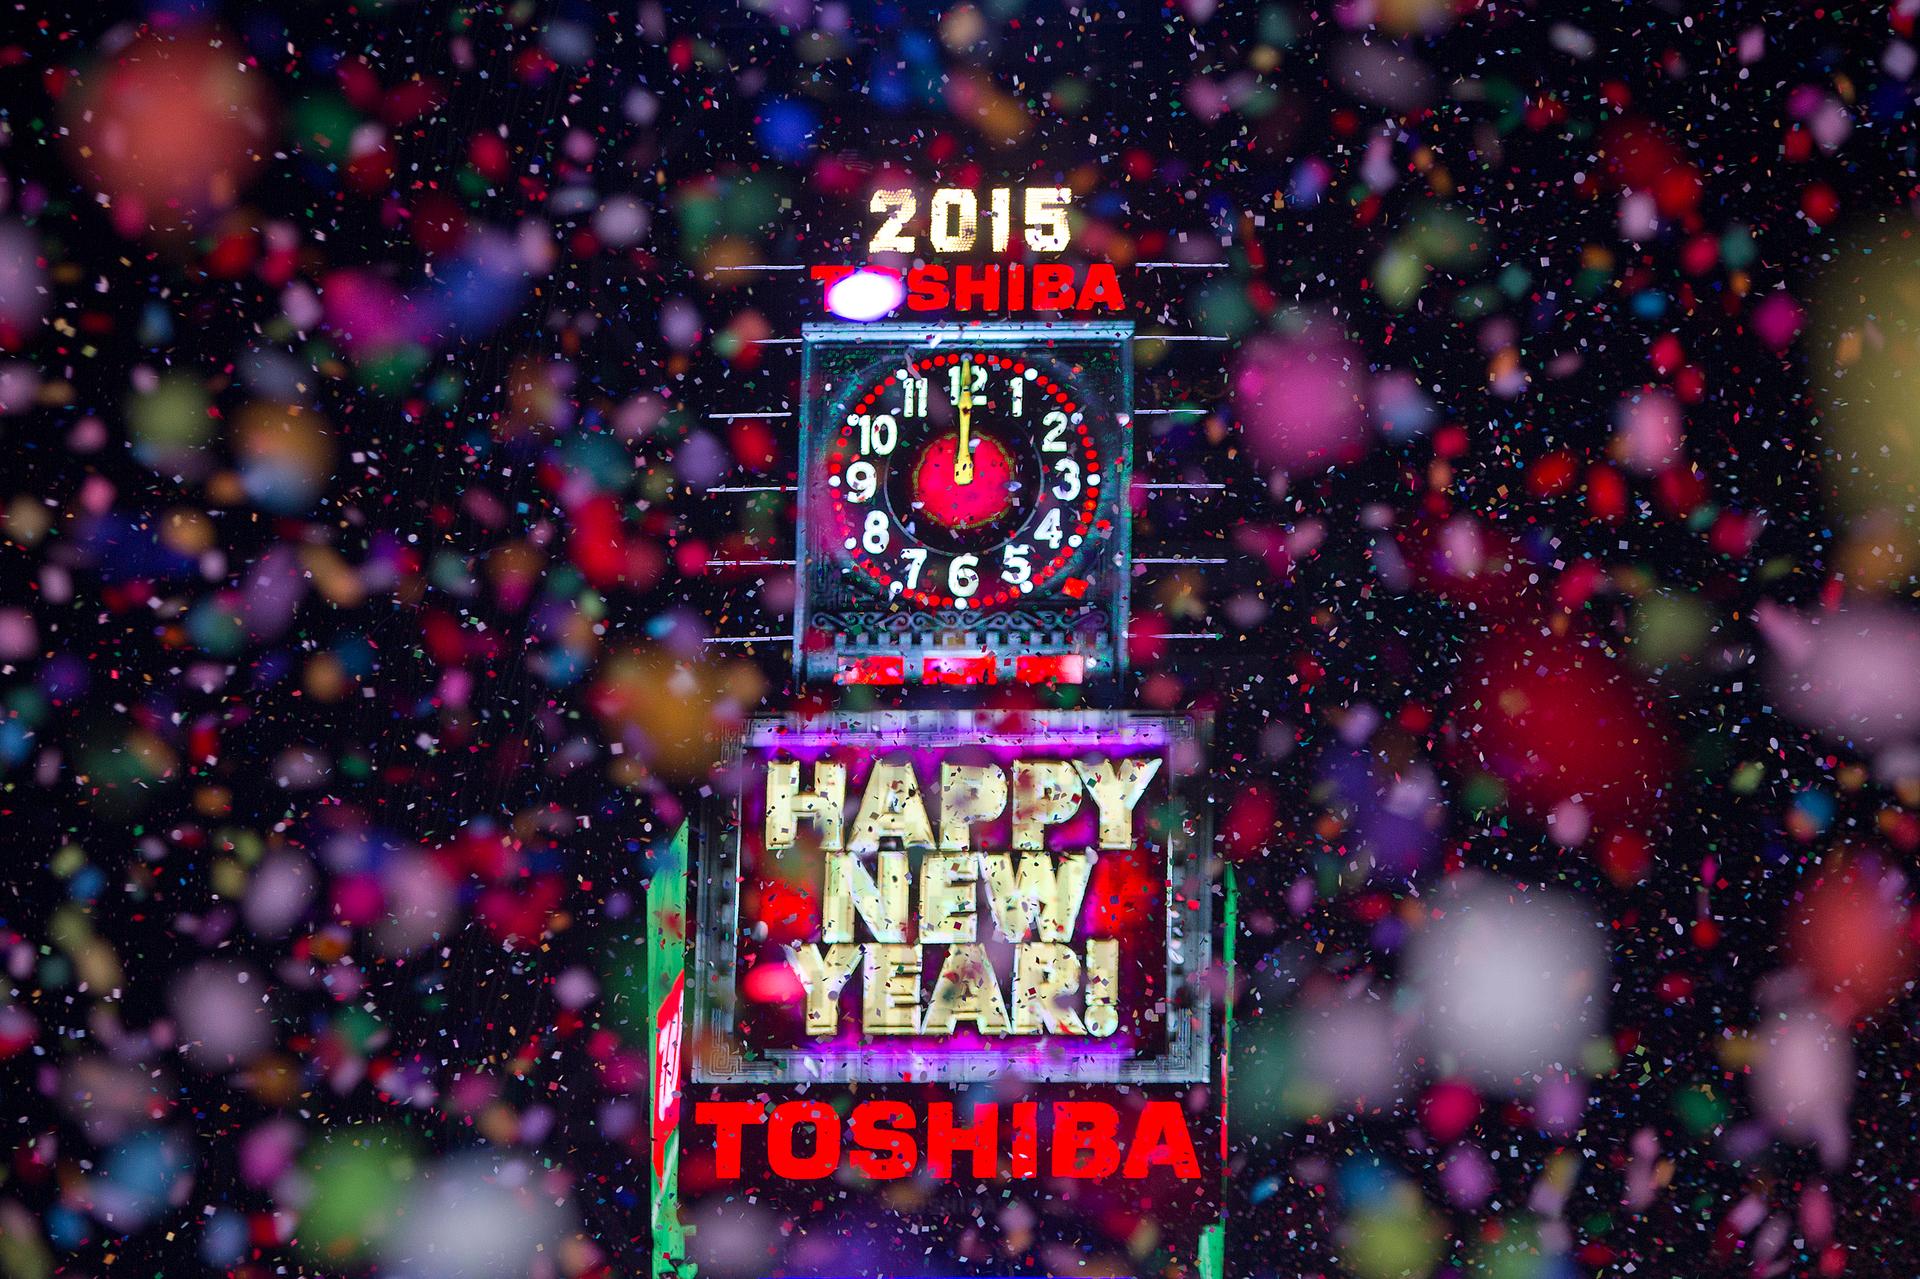 Confetti flies around the ball and countdown clock in Times Square on New Year's Eve in New York January 1, 2015.